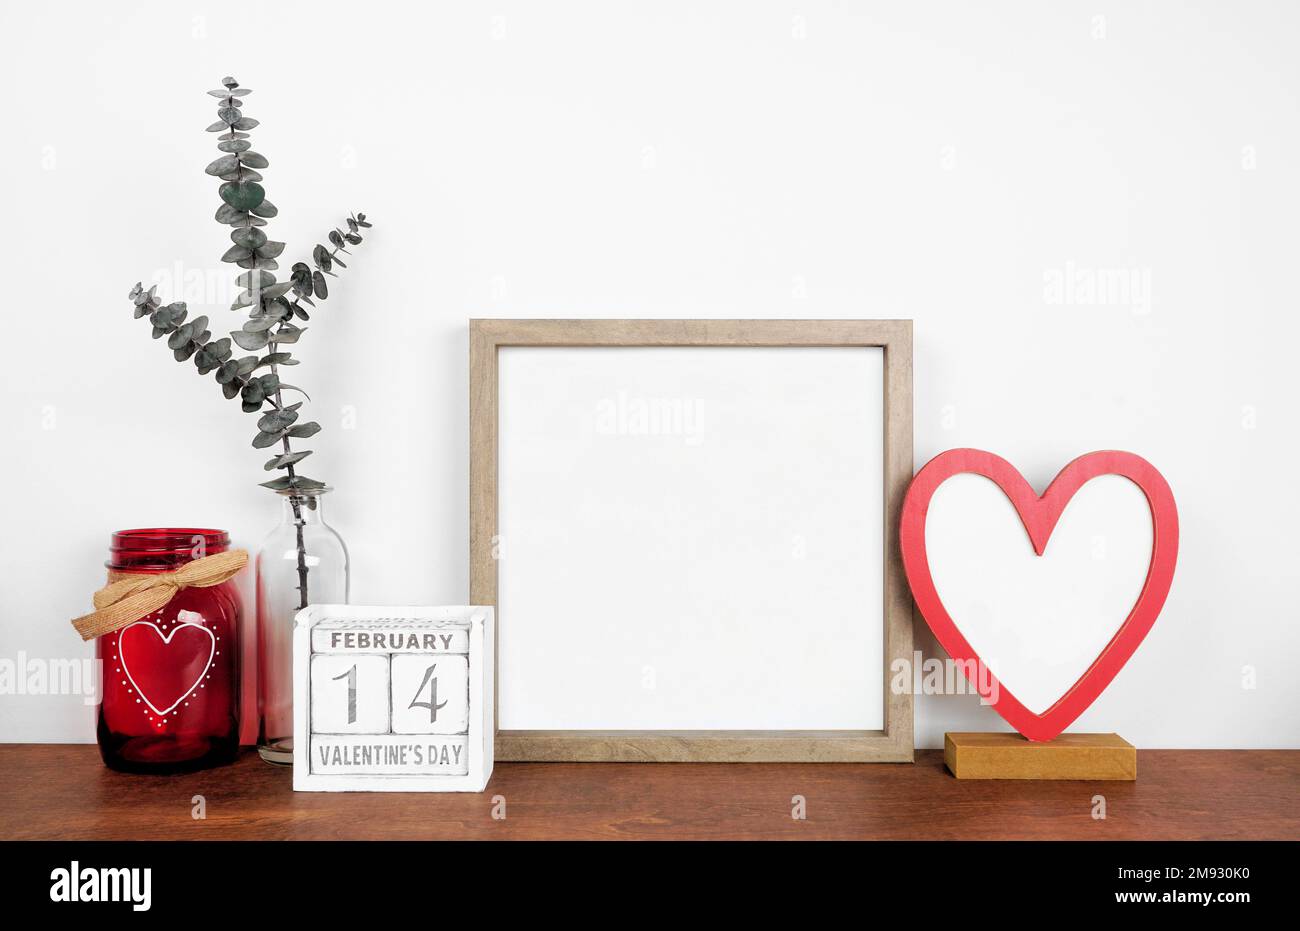 Mock up wood frame with Valentines Day heart decor and calendar. Wood shelf against a white wall. Copy space. Stock Photo